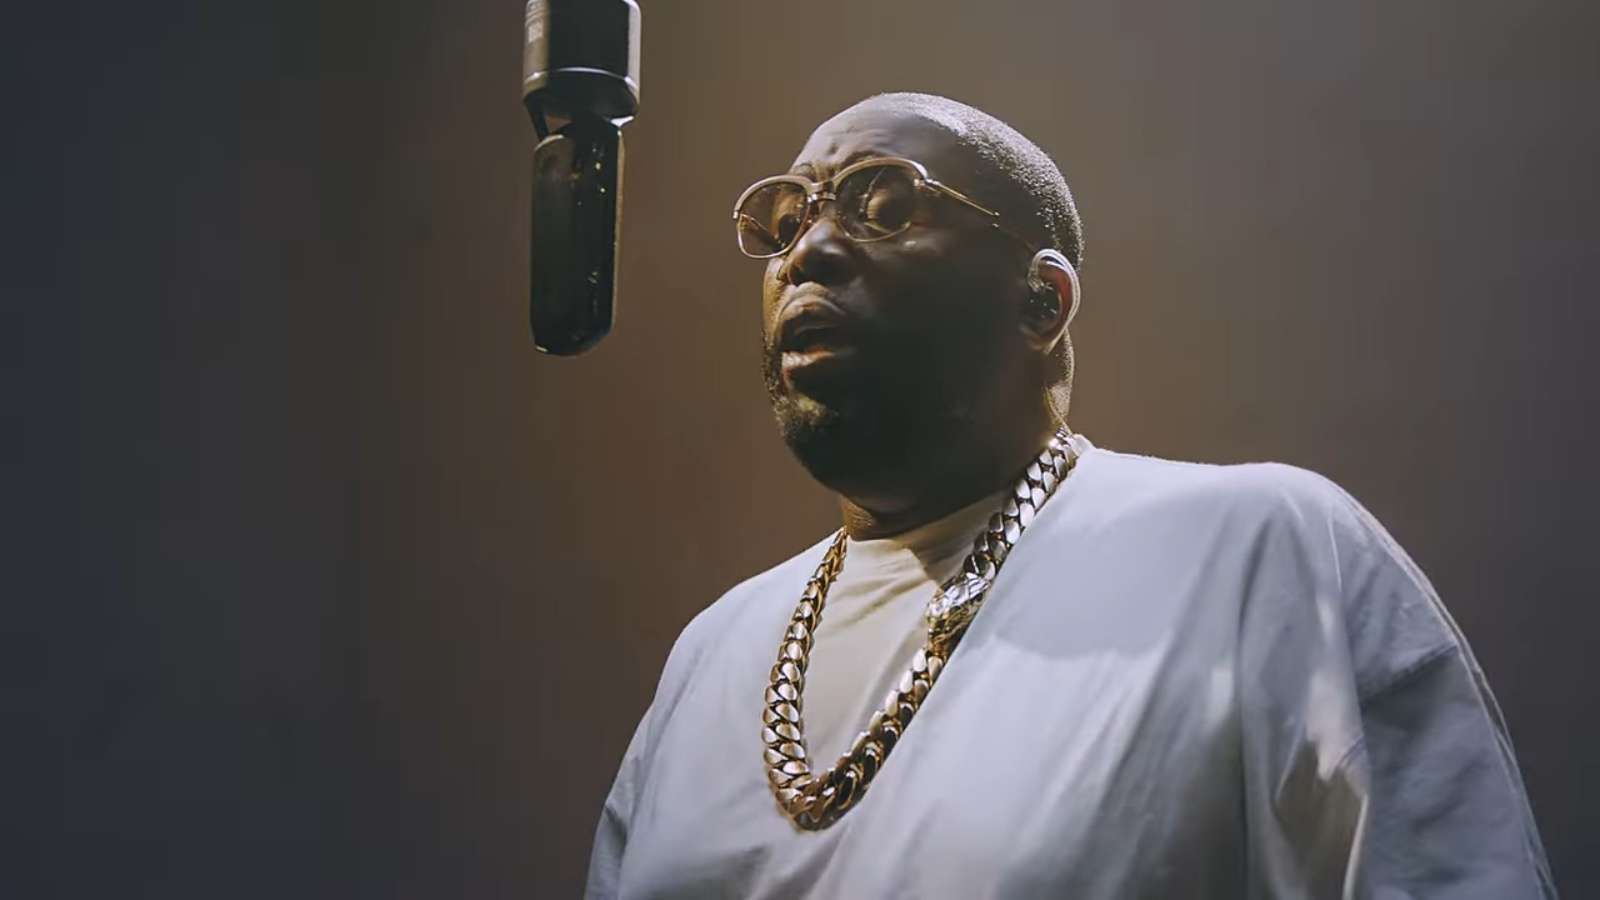 Killer Mike performs in the studio